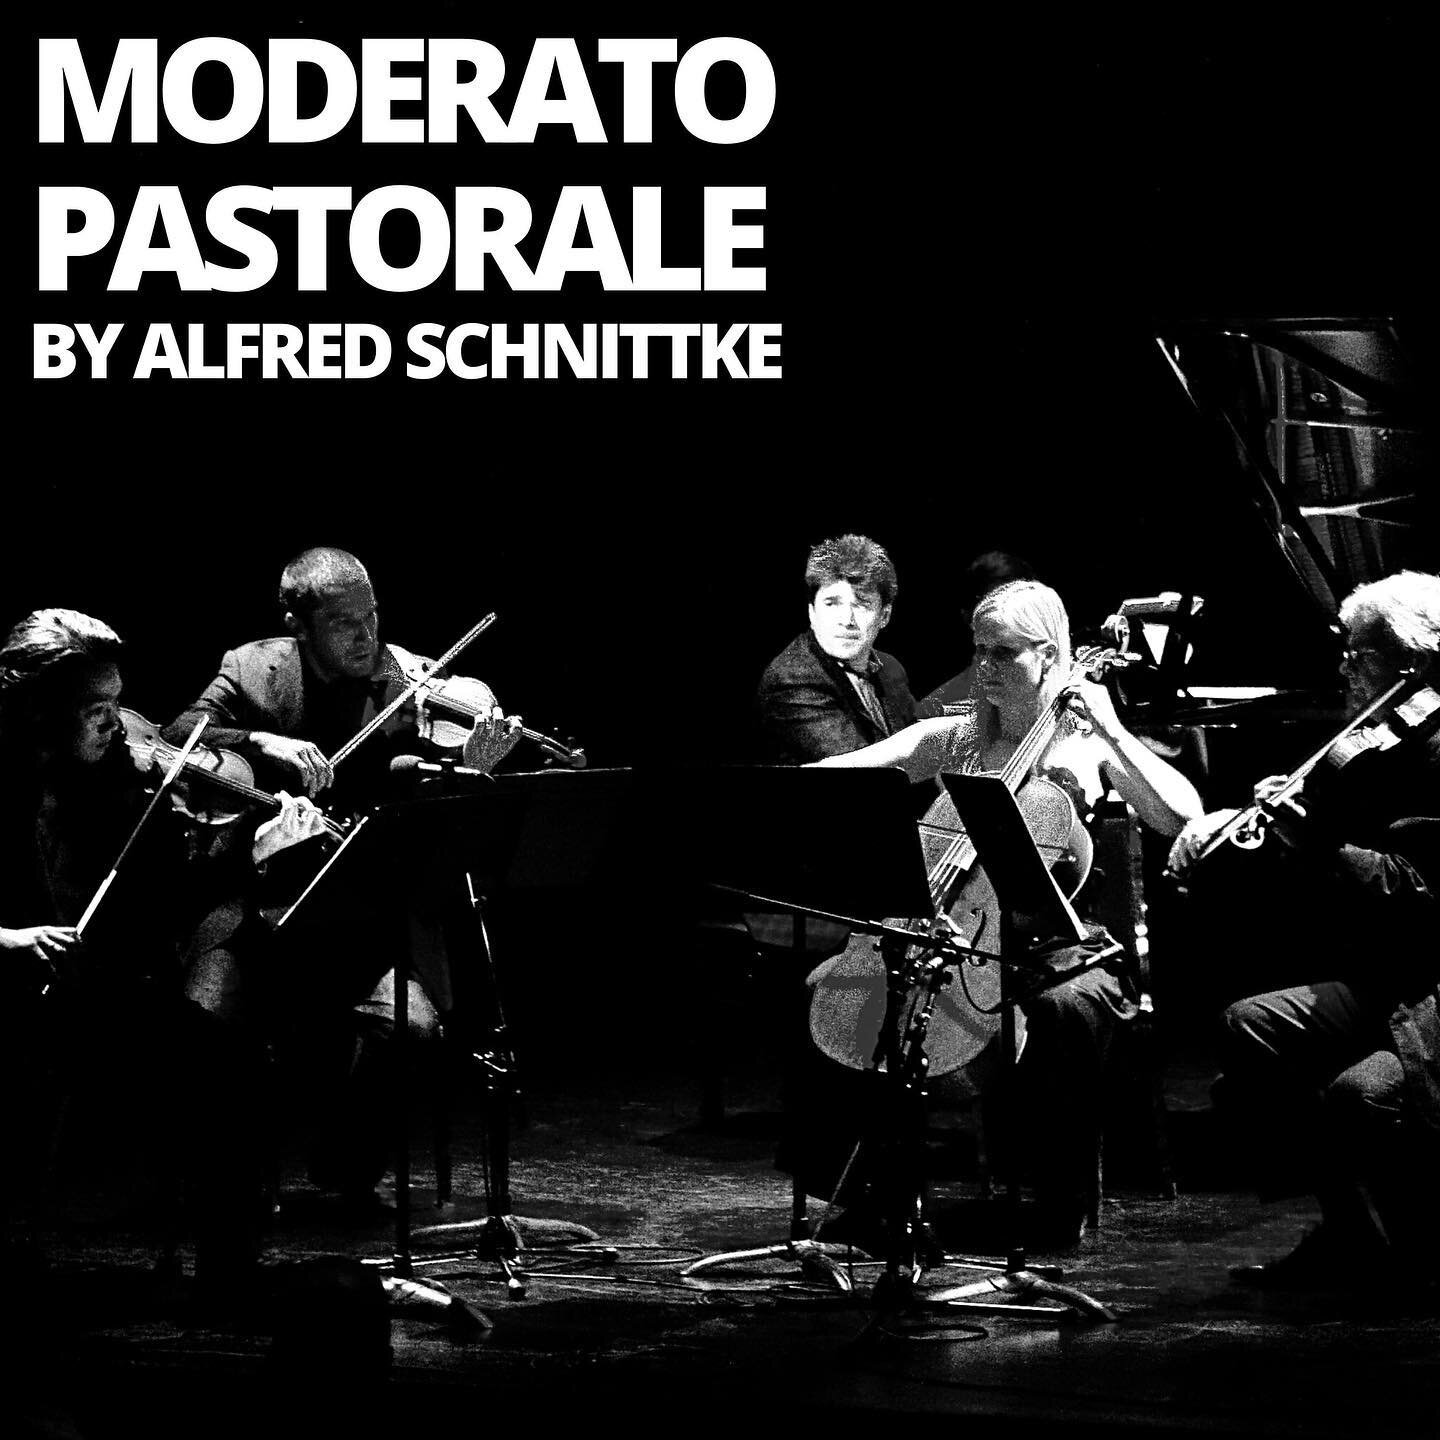 &lsquo;Moderato Pastorale&rsquo; is the last movement of Alfred Schnittke&rsquo;s Piano Quintet.  This live performance, from 2002, features Andrew Burashko on piano, Mark Fewer and Stephan Sitarski on violins, David Rose on viola and Thomas Wiebe on